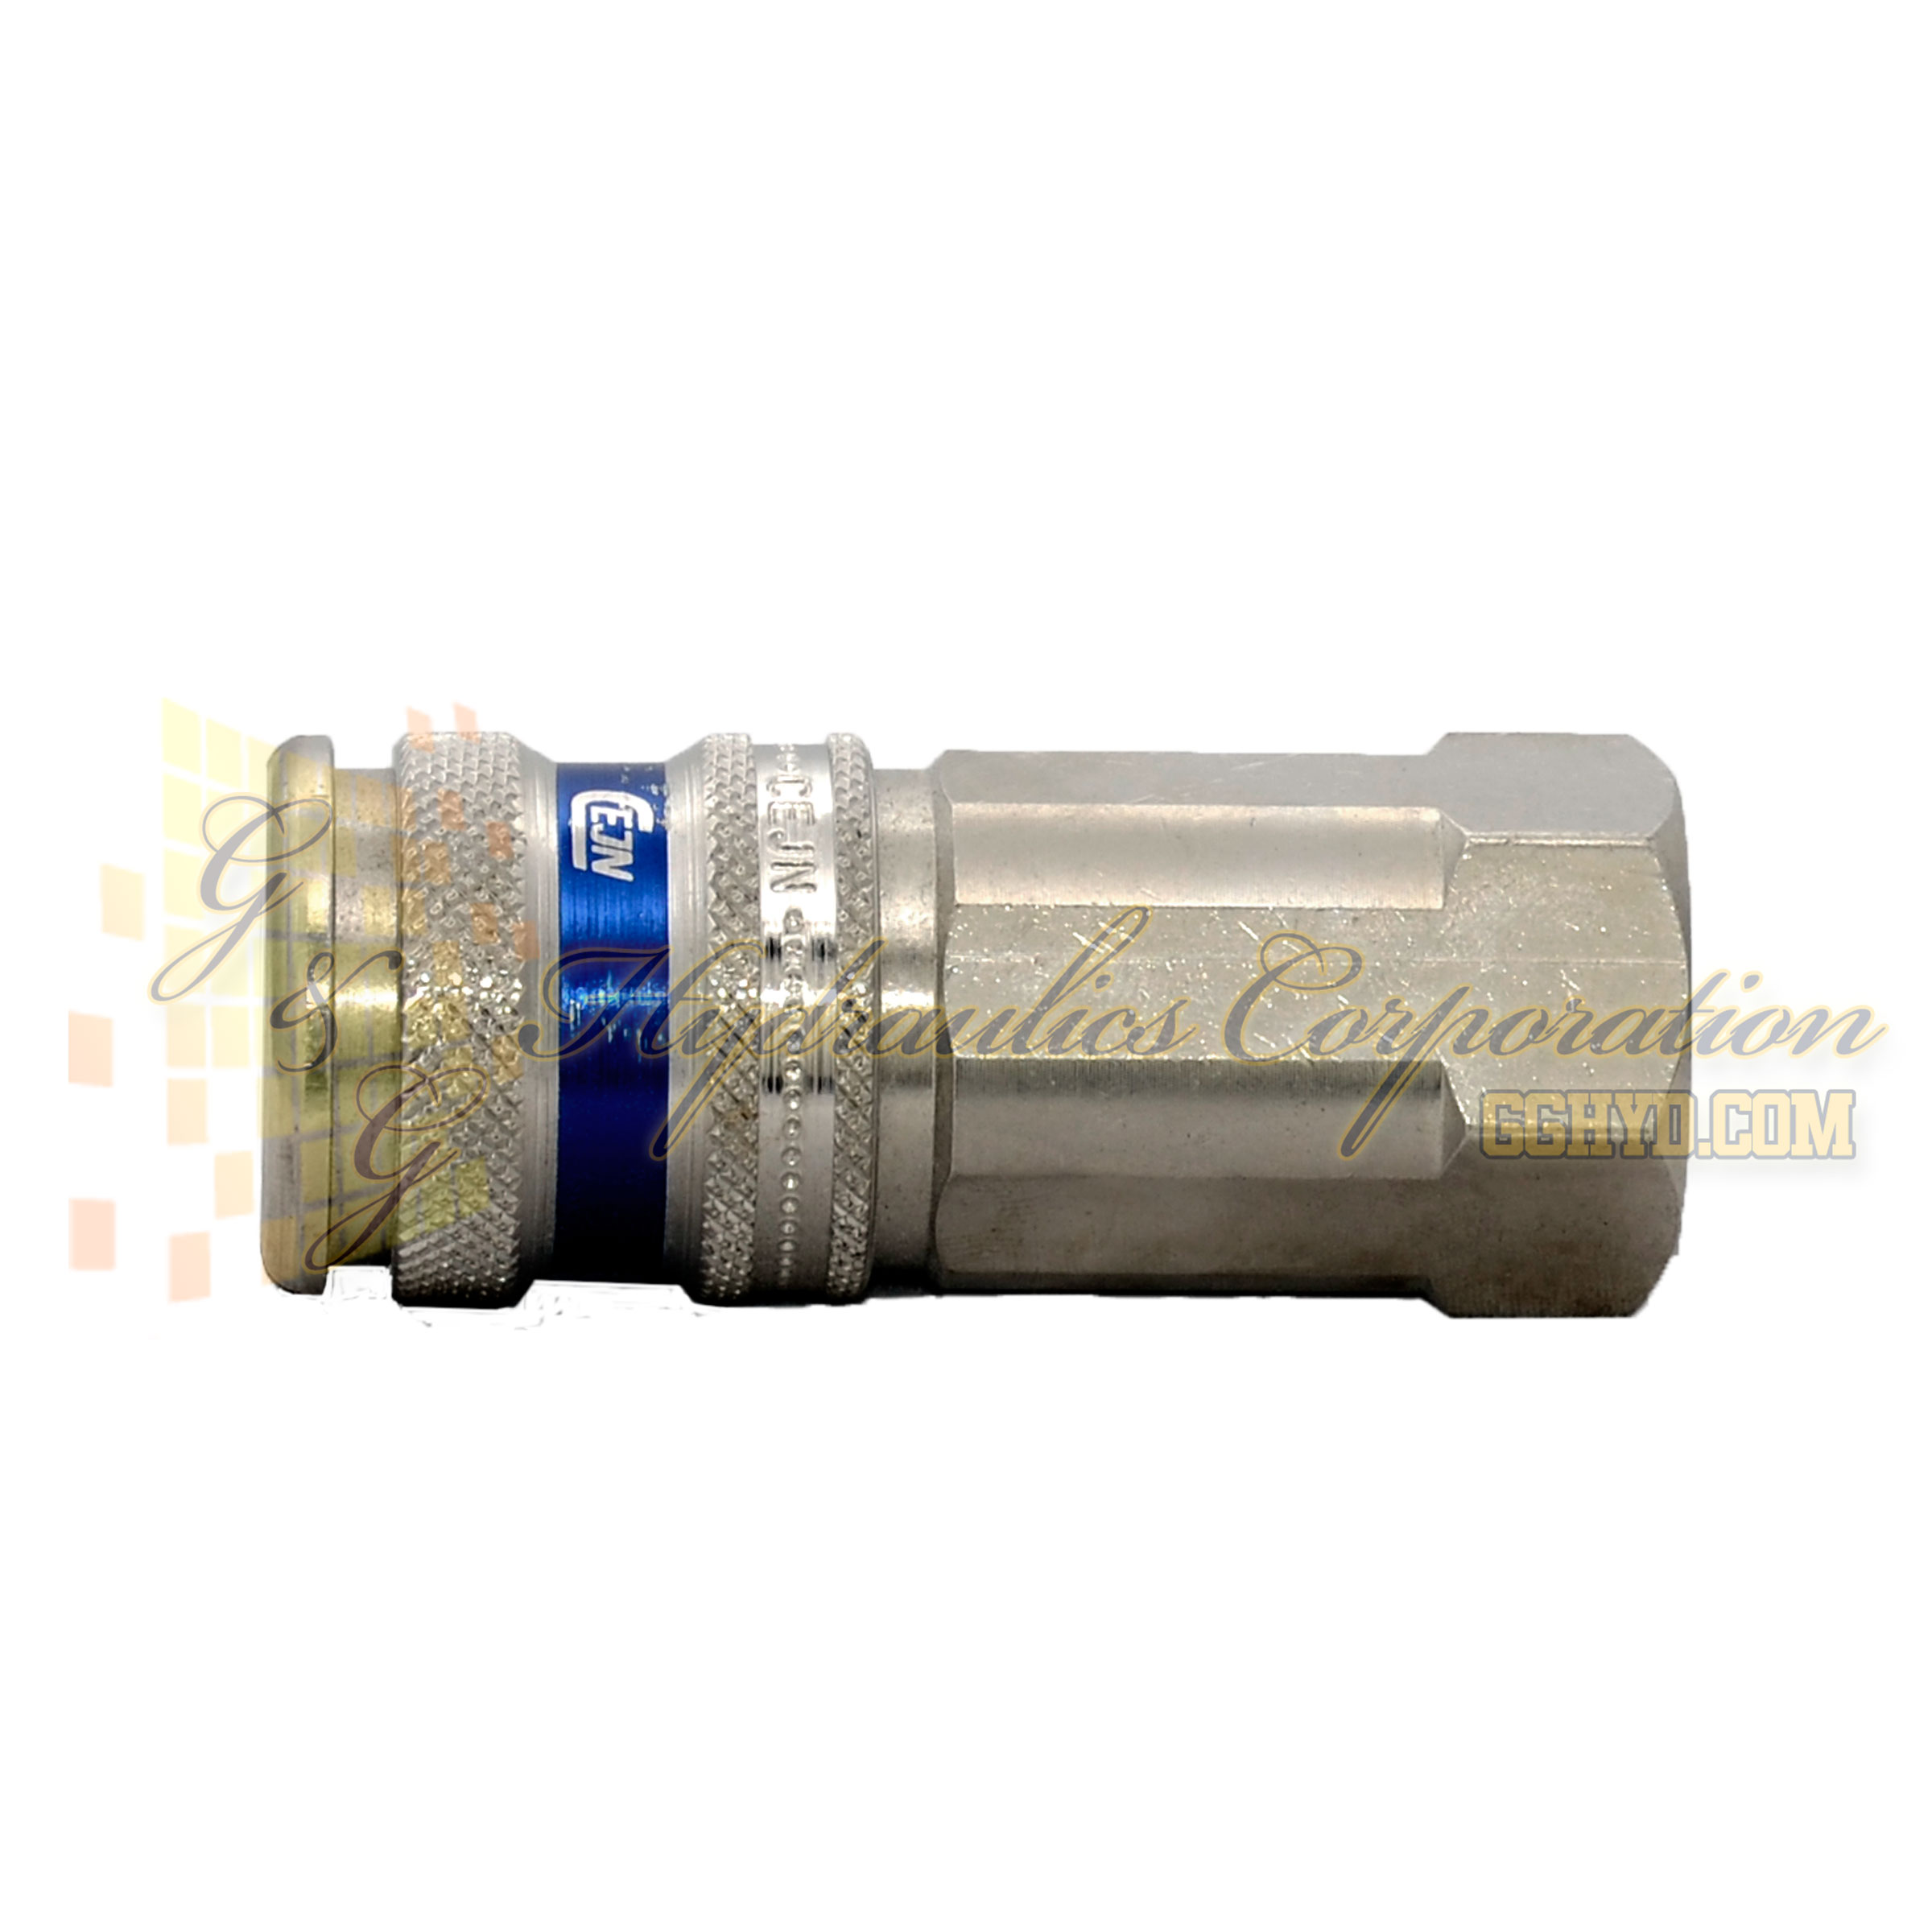 10-320-1405 CEJN Standard and Vented Safety Coupler, 1/2" NPT Female Threads